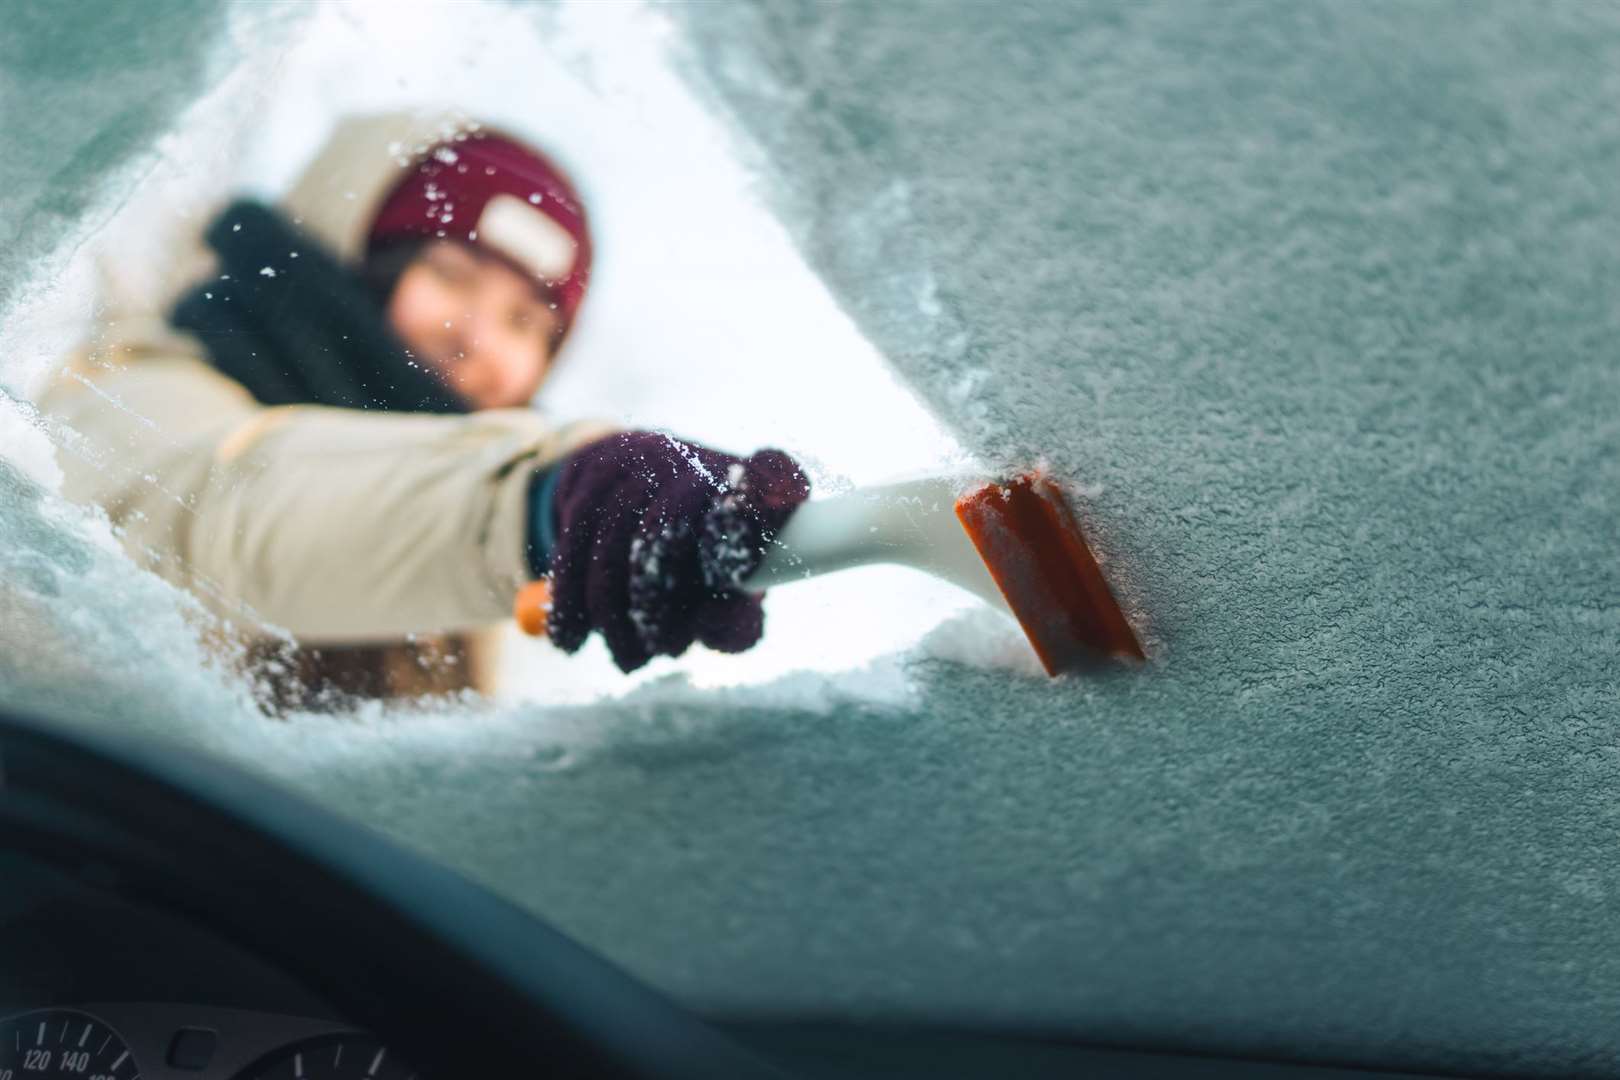 Drivers are being asked to pay close attention to weather conditions in the coming days. Image: iStock.